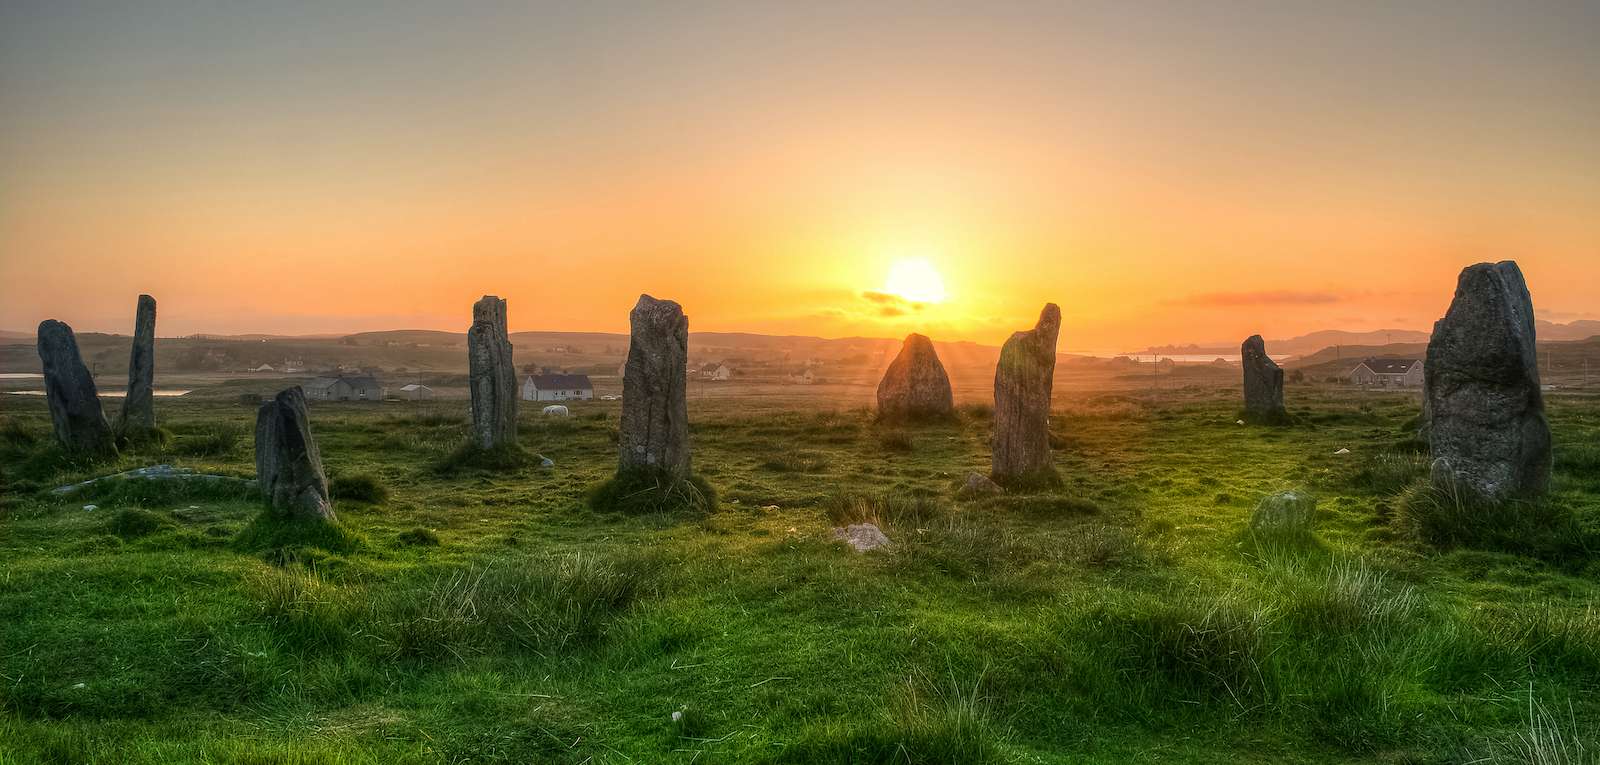 Sunset over the Callanish 2, circle of standing stones from 4000 BC on the Isle of Lewis, Outer Hebrides, Scotland